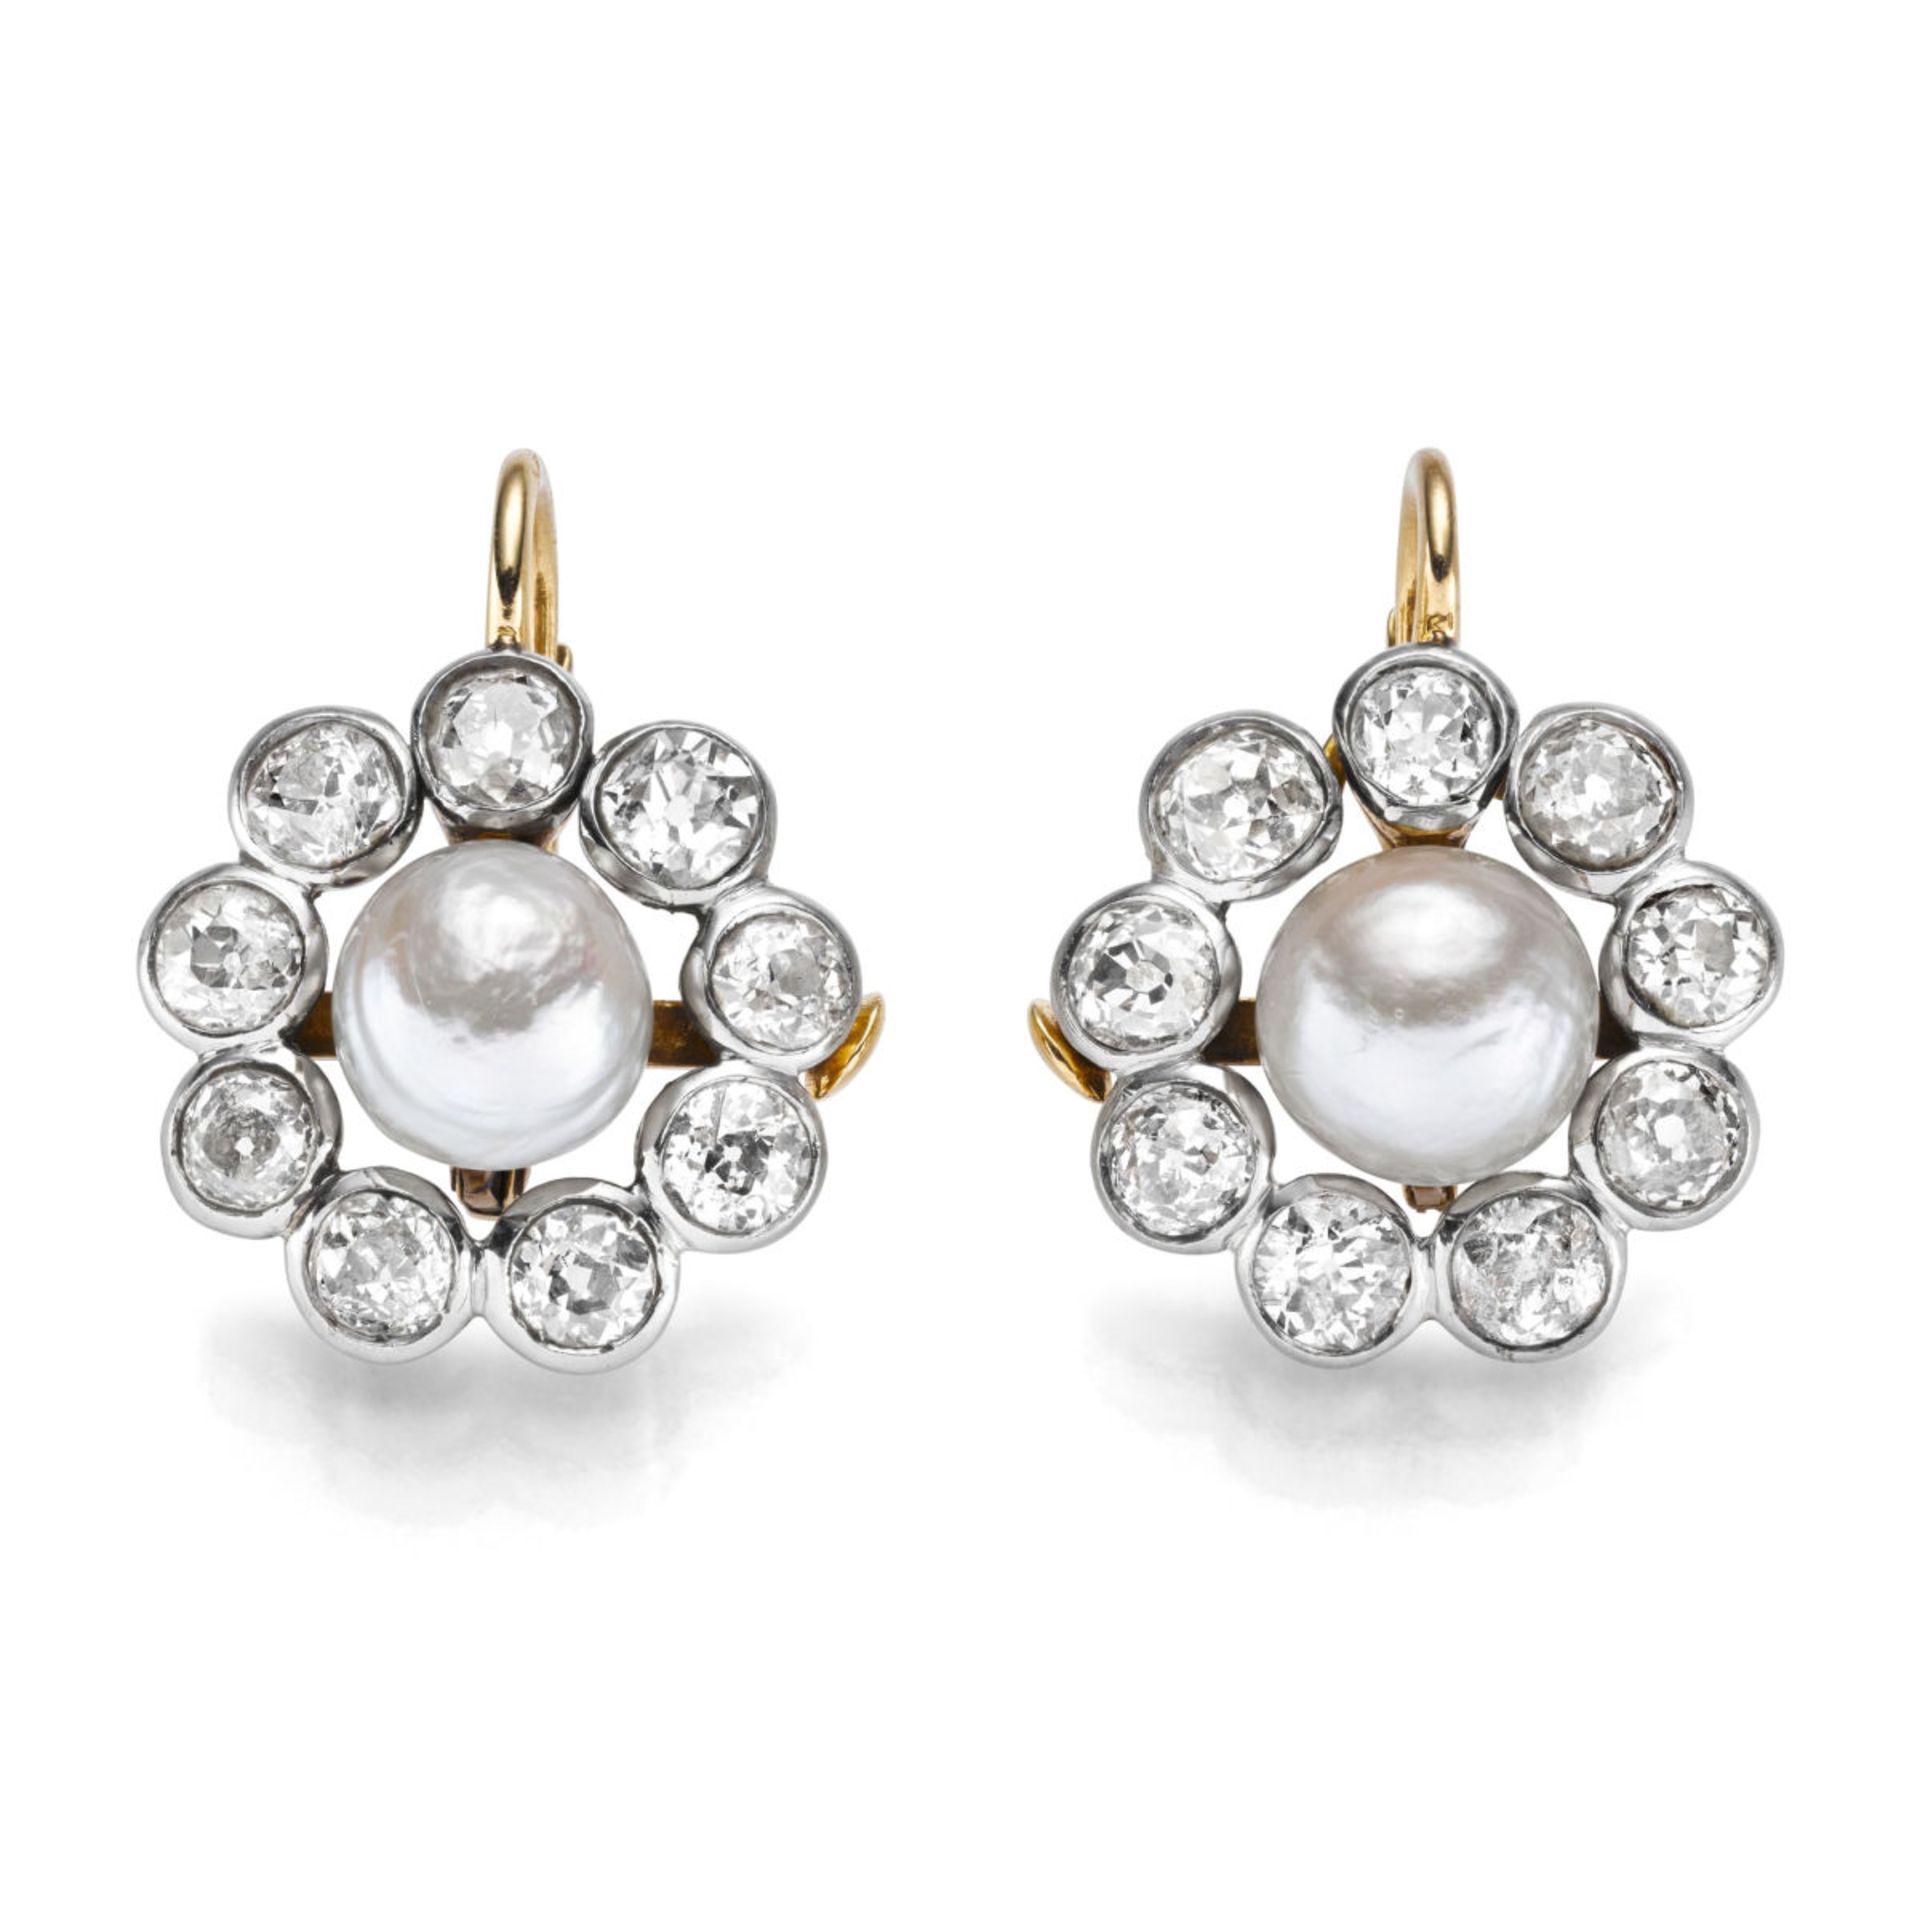 Pair of Belle Époque entourage earrings with oriental pearls and diamonds 